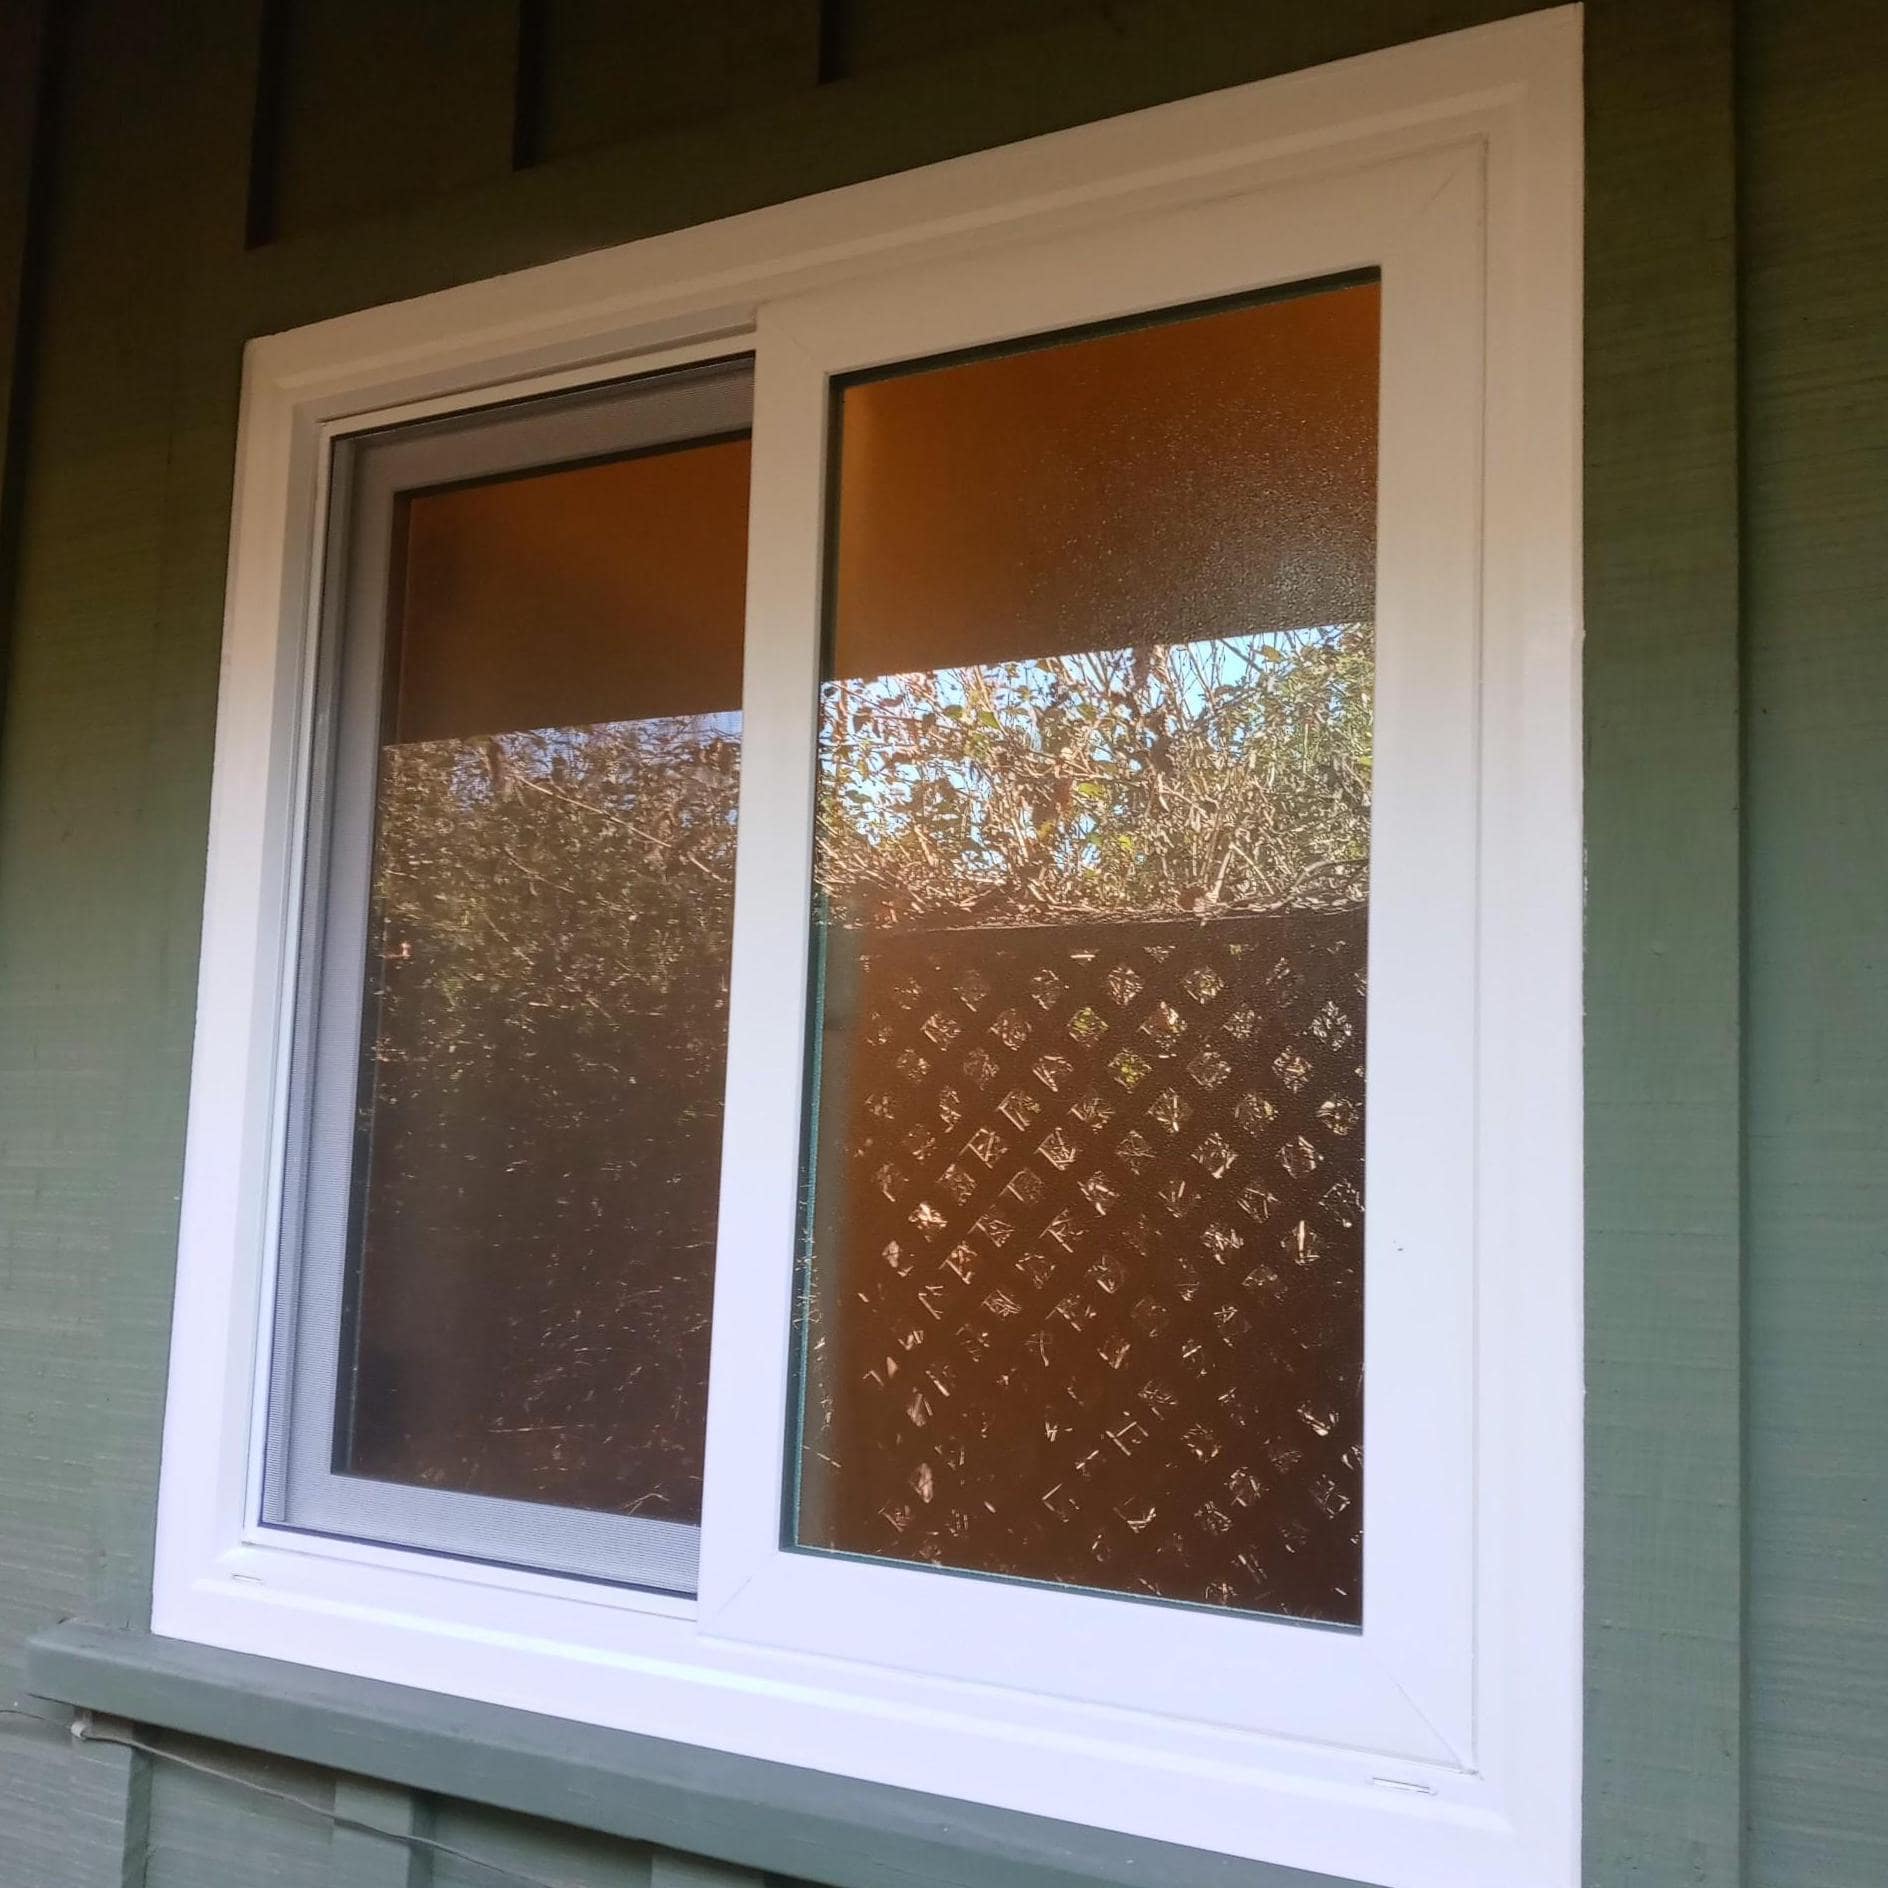 Example of a Single Slider Window from Clovis Glass